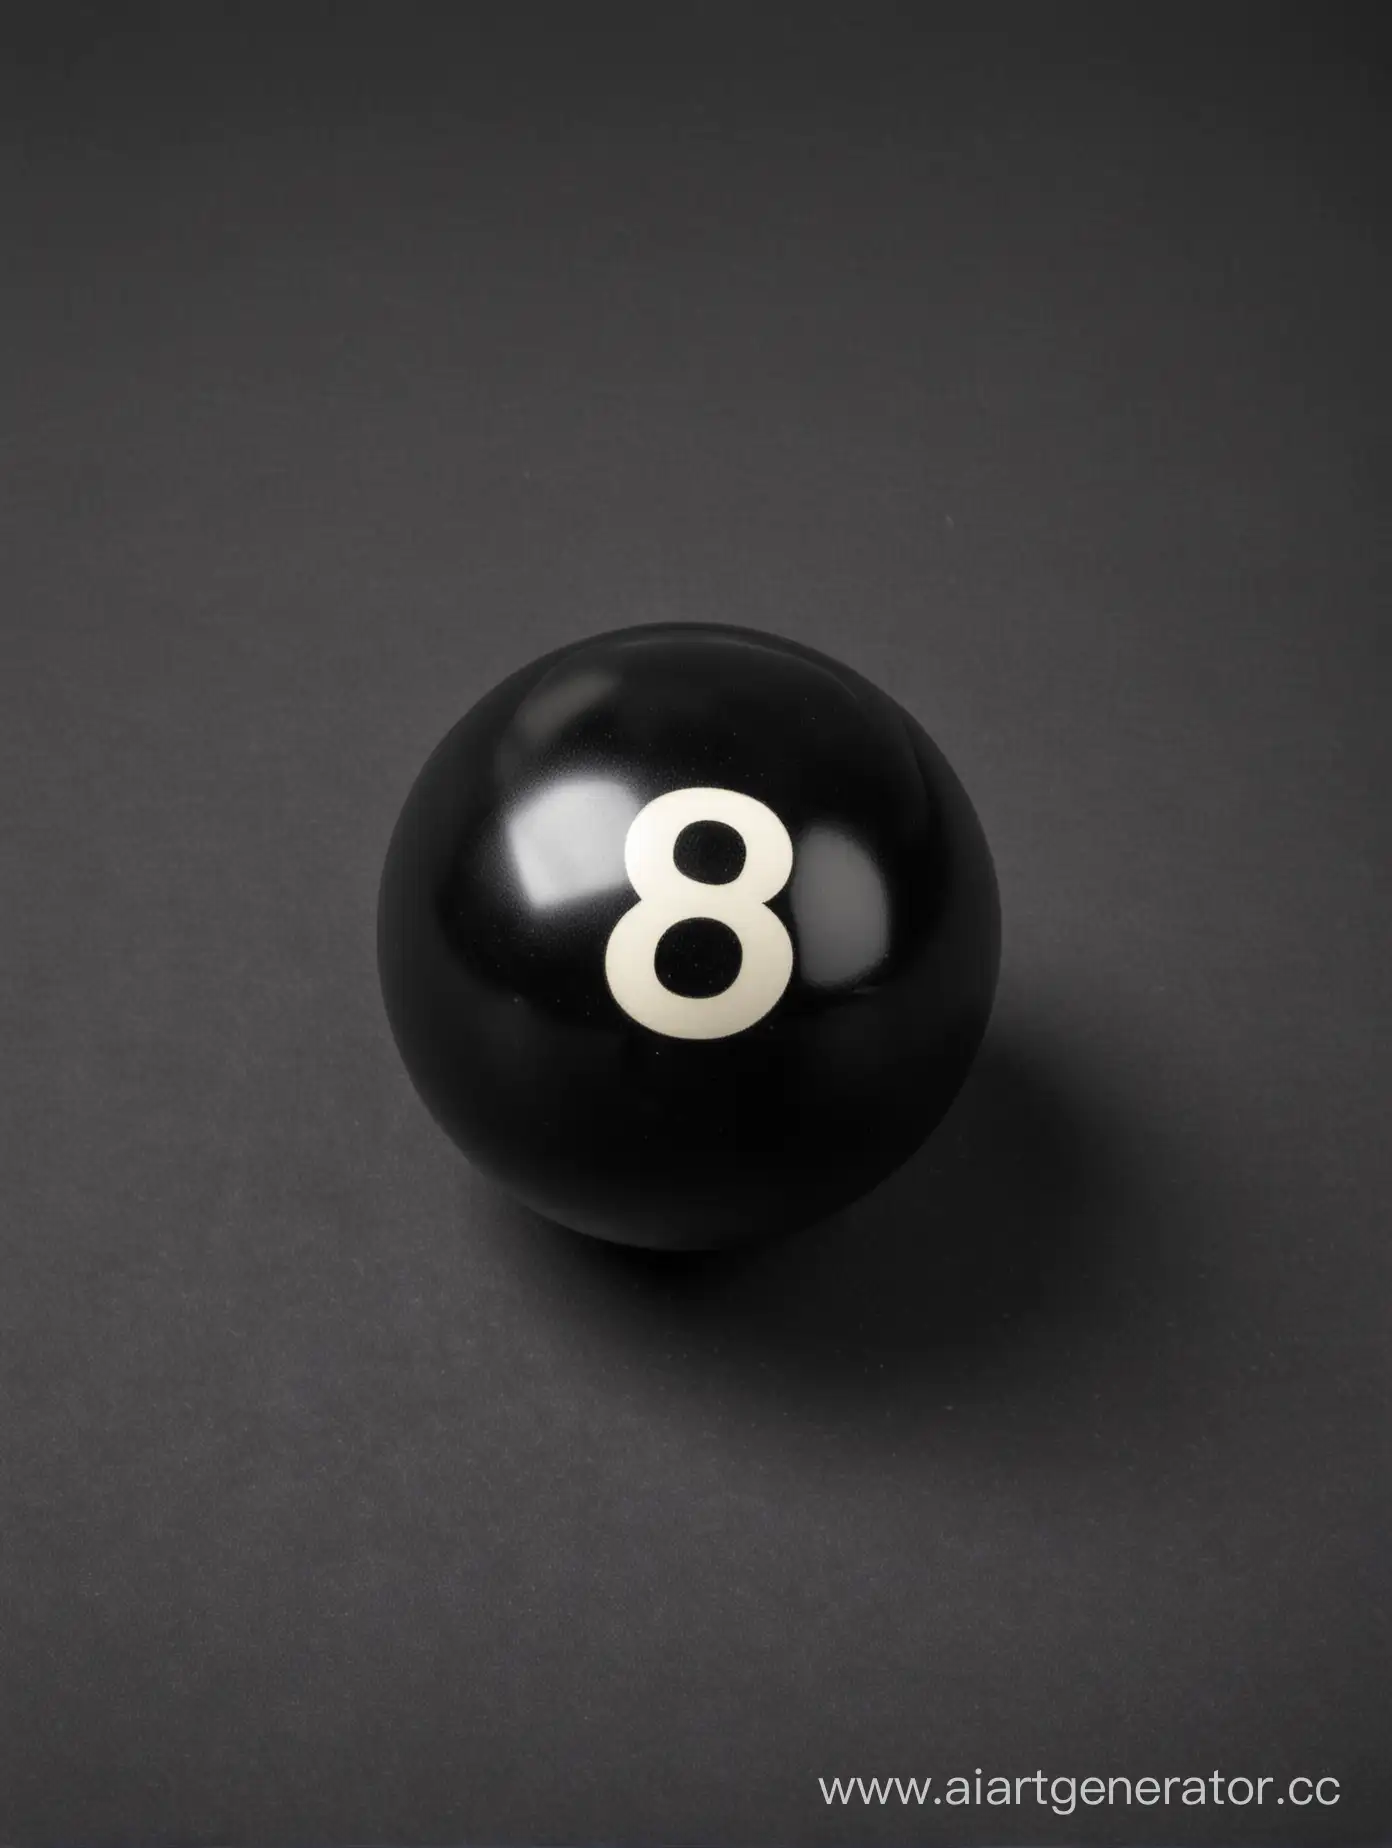 Black-Billiard-Ball-with-Number-8-in-Focus